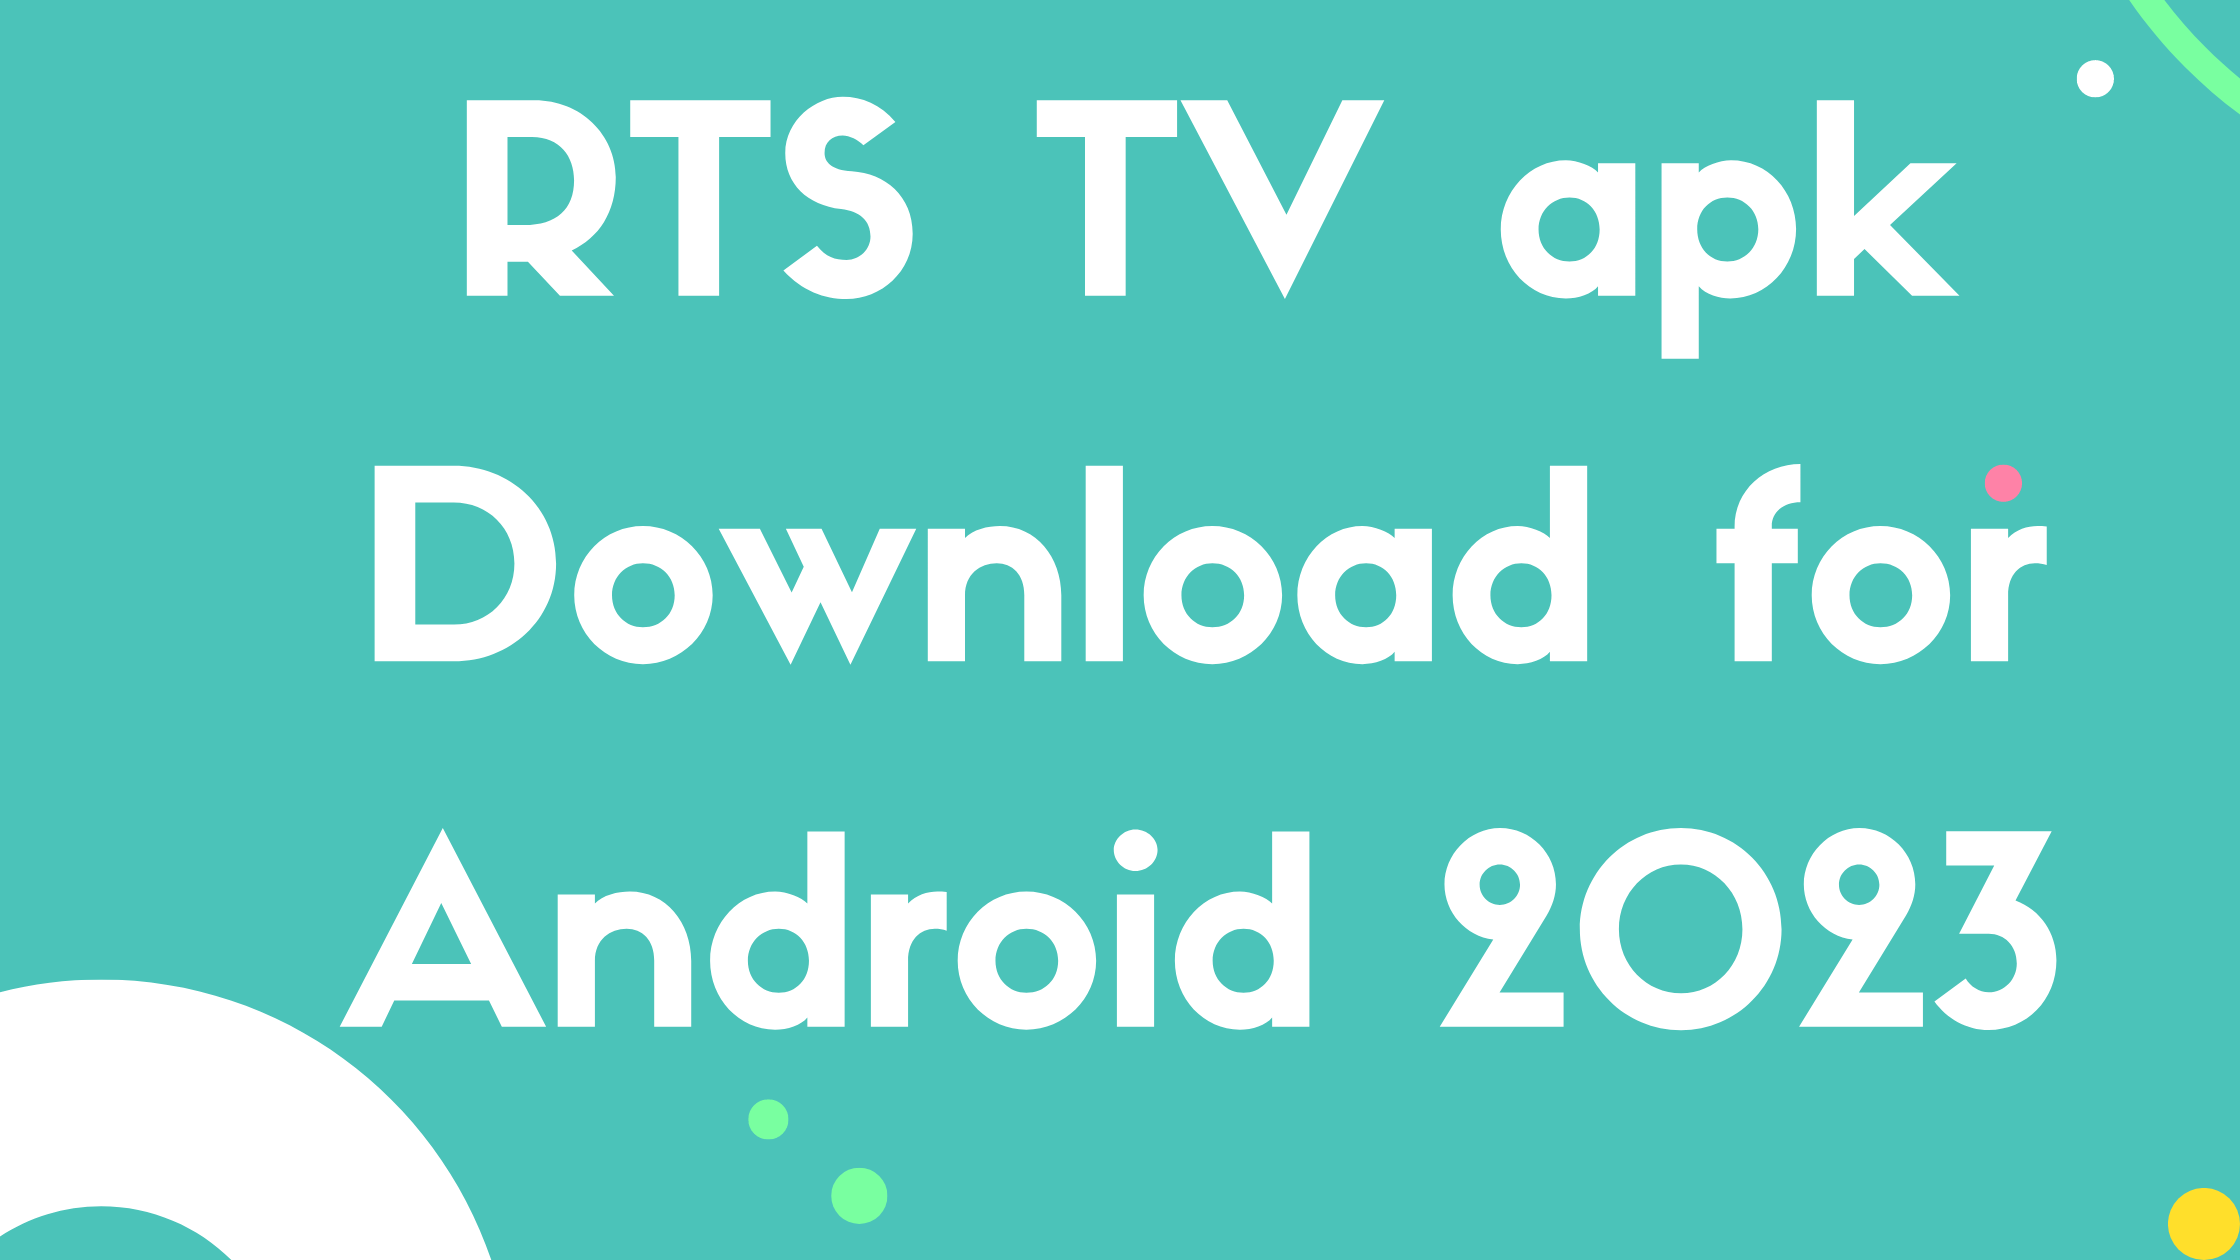 RTS TV apk Download for Android 2023